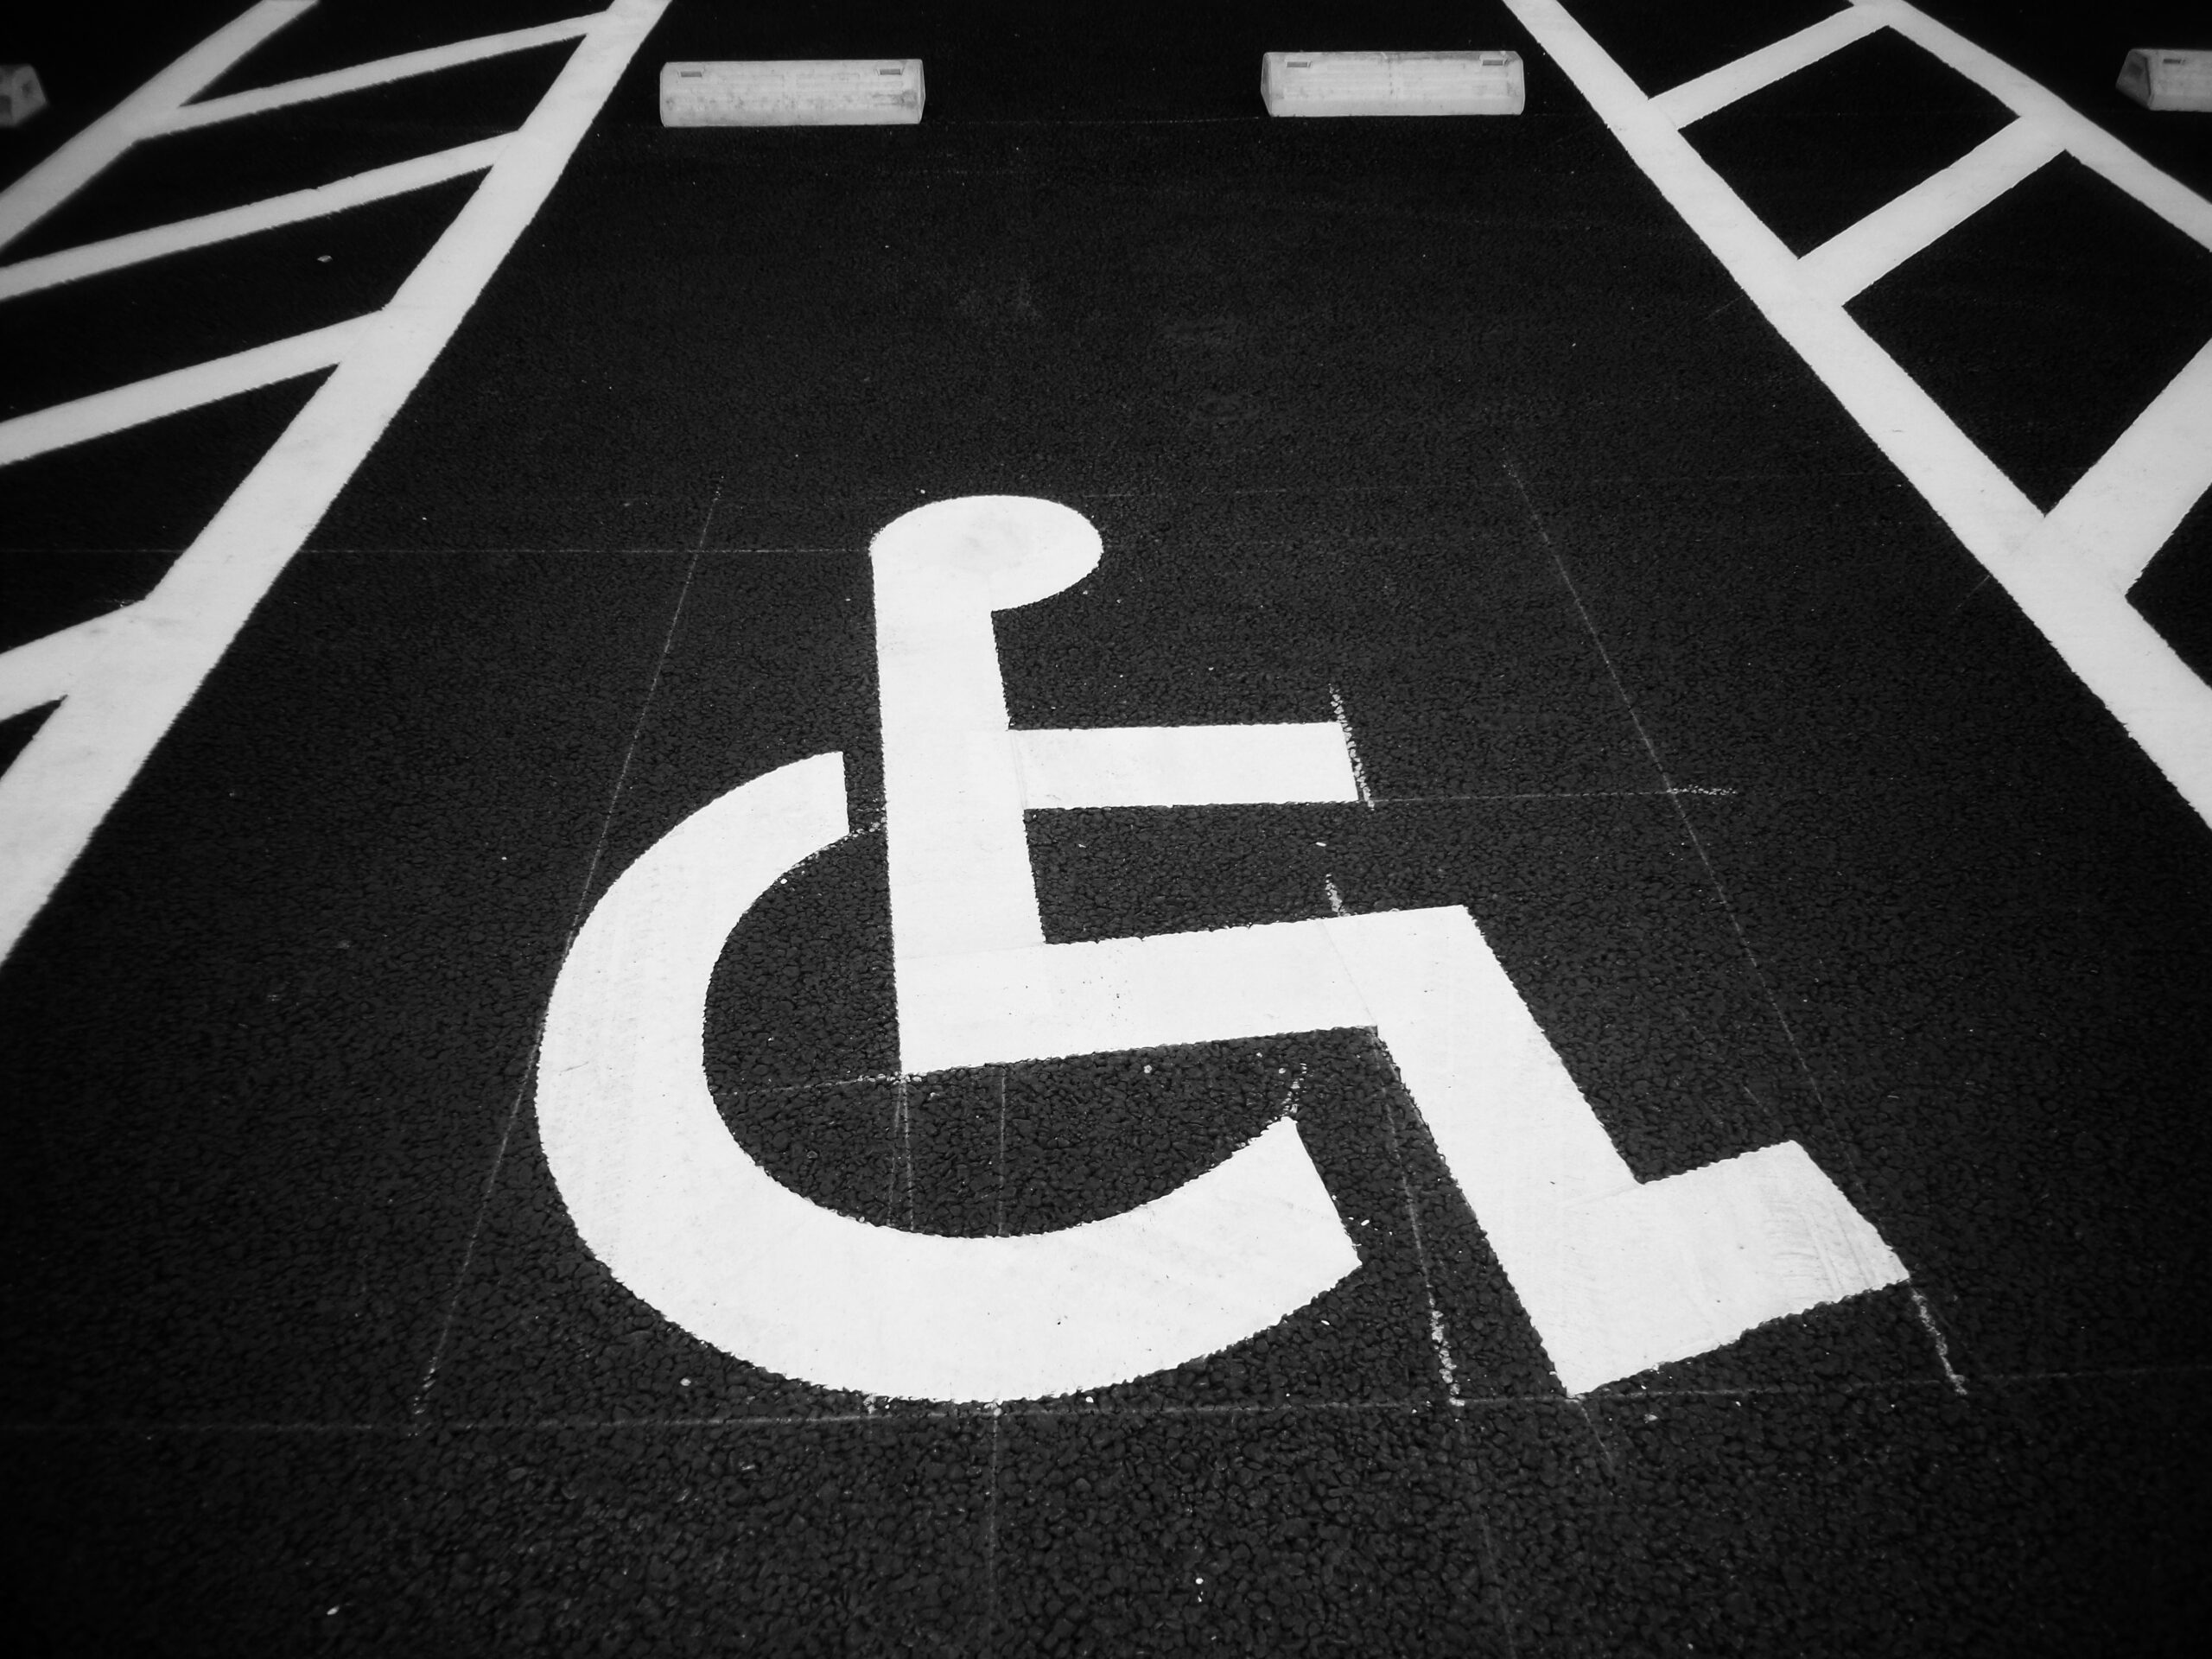 Hiring People with Disabilities Is Not a Charity: Here’s Why and How to Stop Paying Subminimum Wage